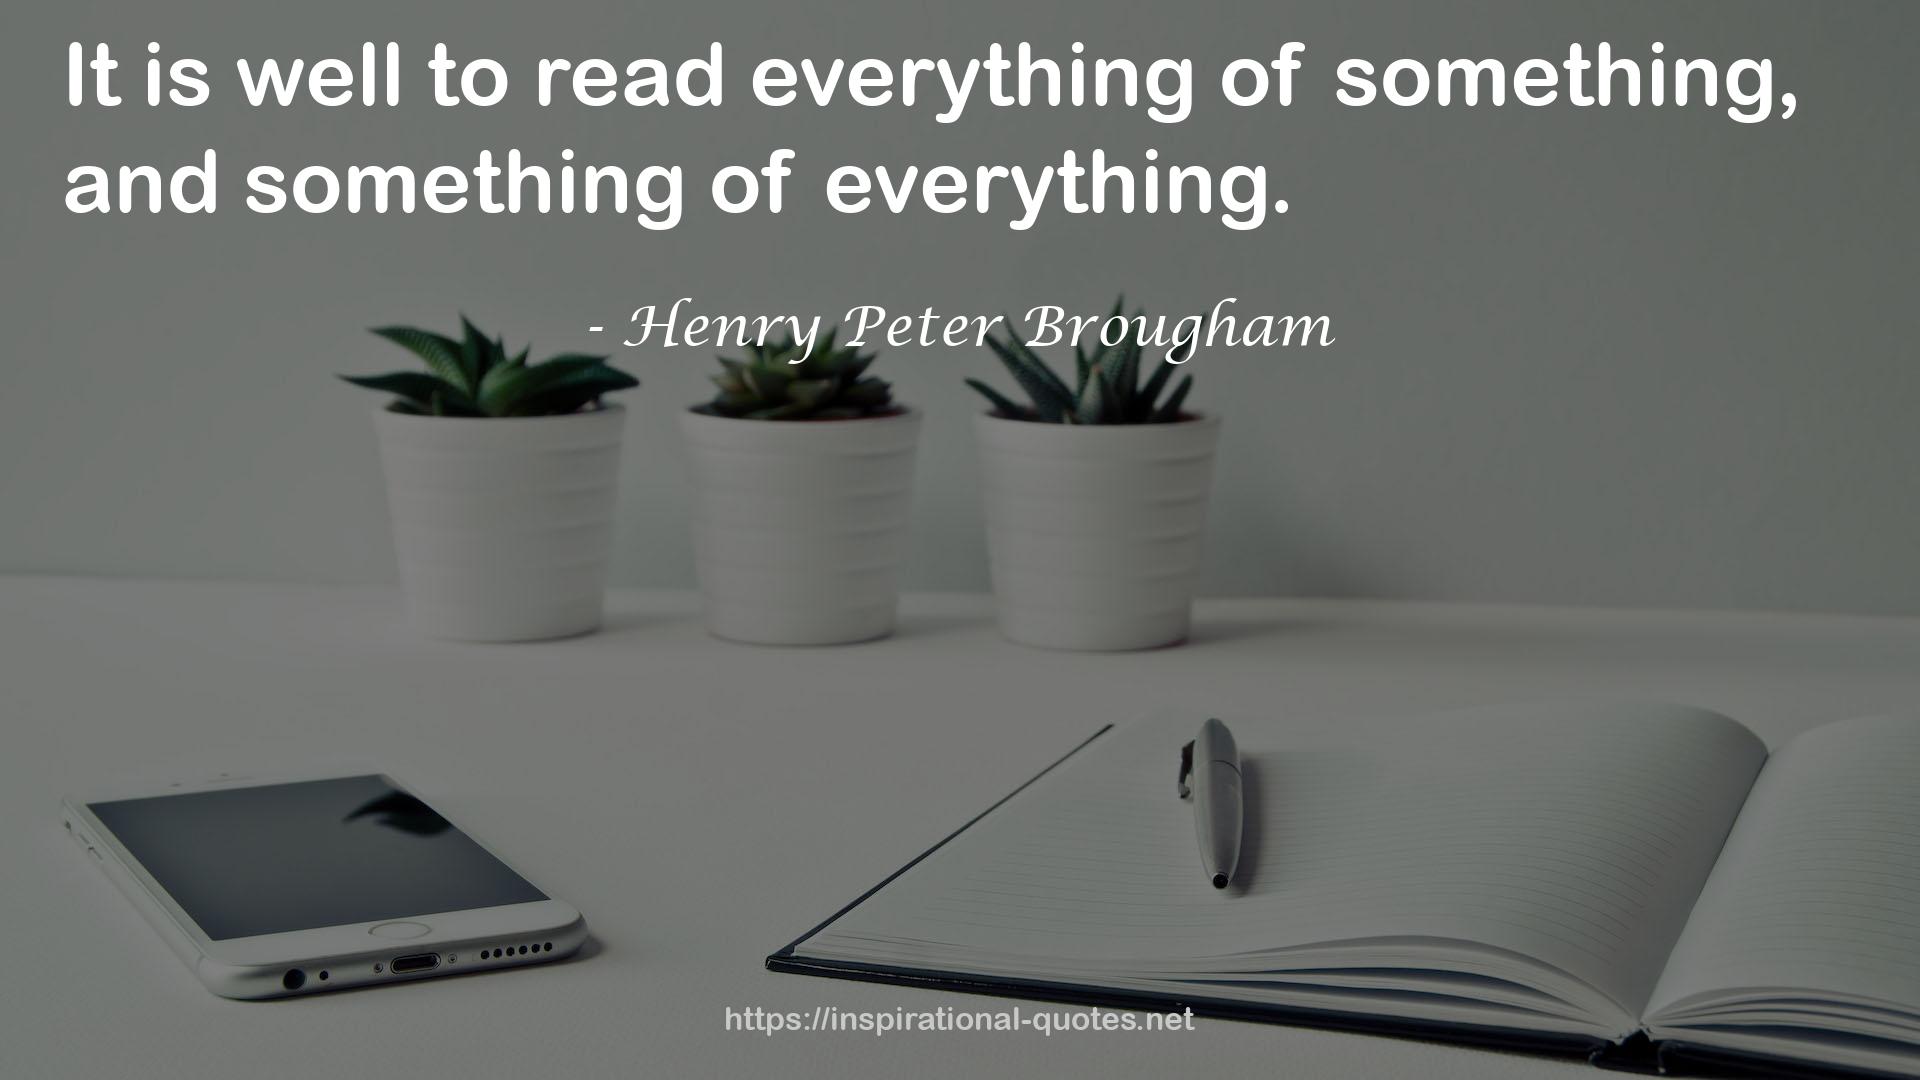 Henry Peter Brougham QUOTES